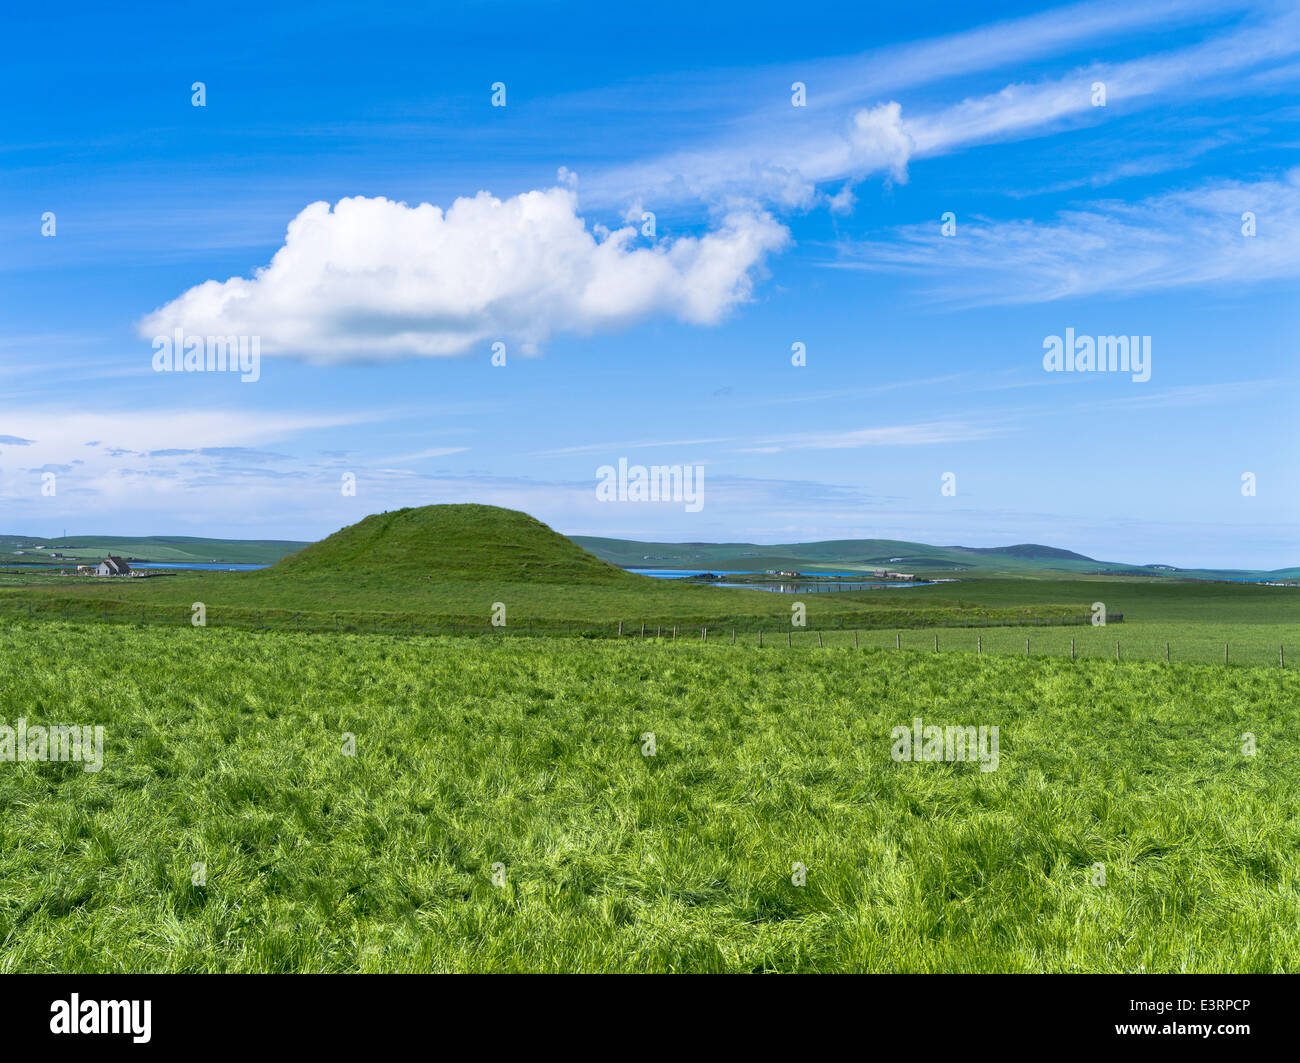 dh Neolithic burial chamber MAESHOWE MOUND ORKNEY SCOTLAND Prehistoric tomb bronze age site ancient mounds uk Stock Photo